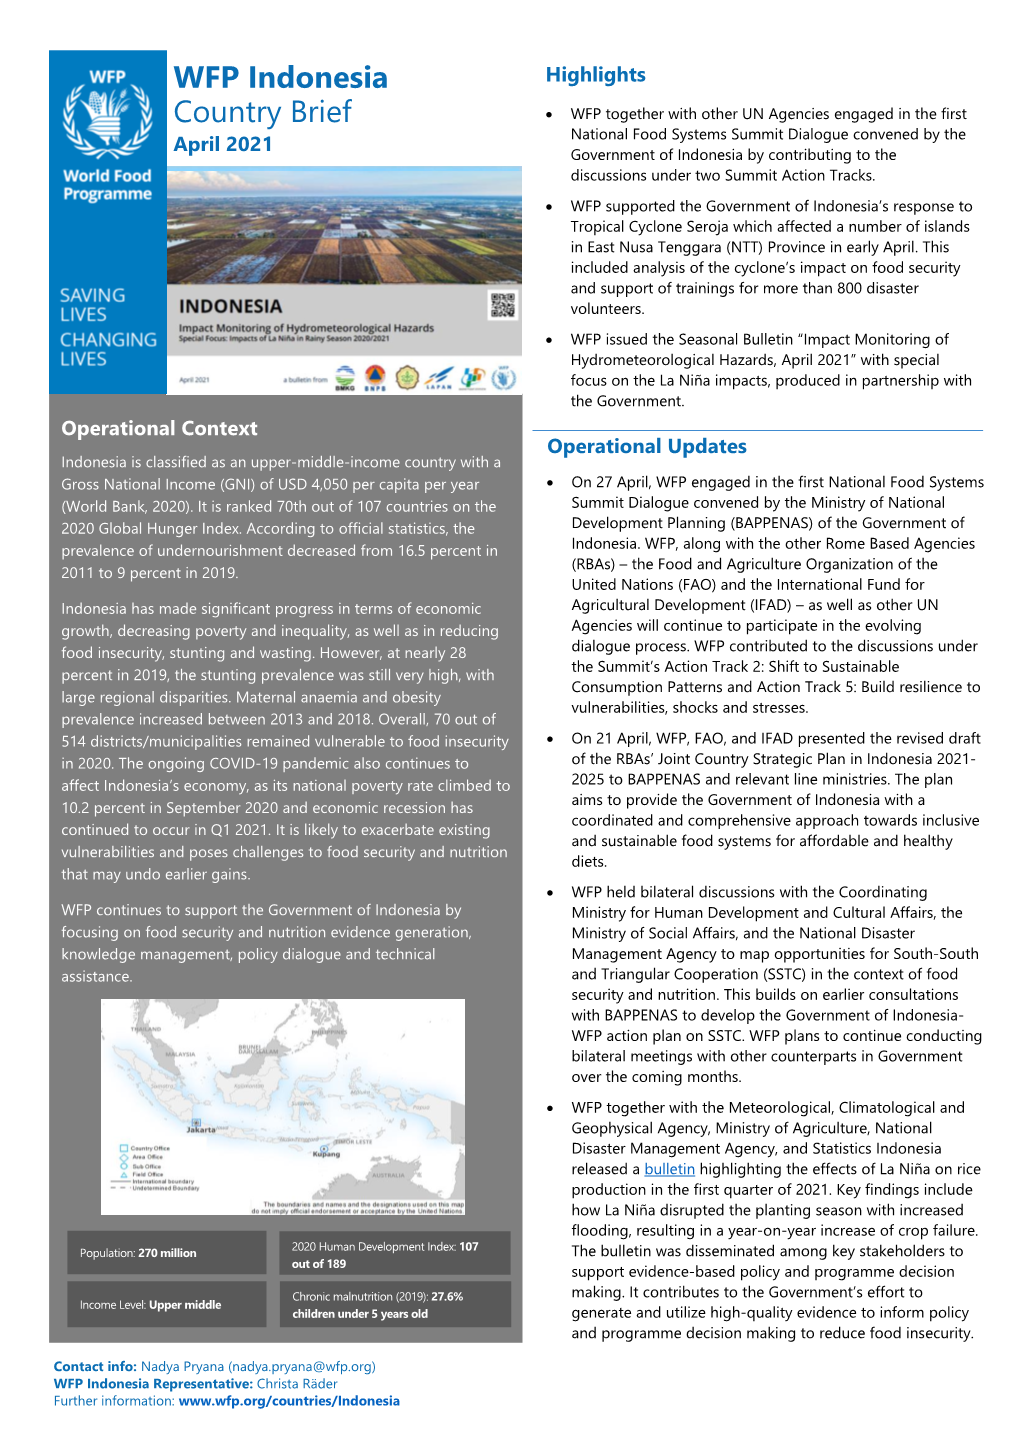 WFP Indonesia Country Brief April 2021